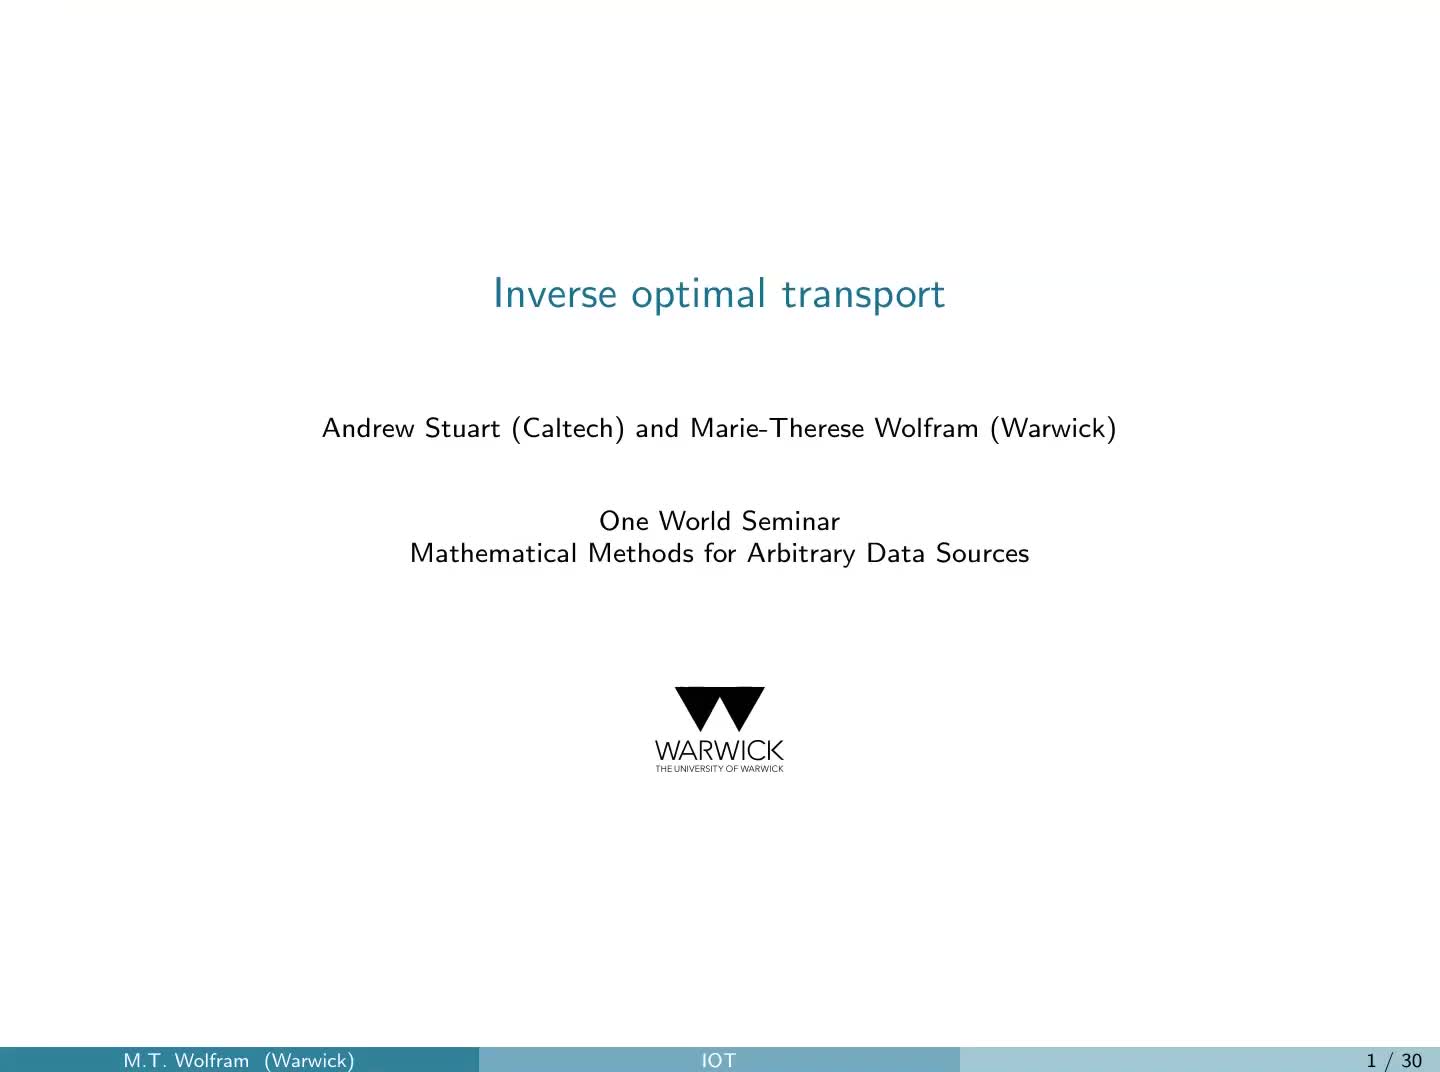 Marie-Therese Wolfram: Inverse Optimal Transport preview image